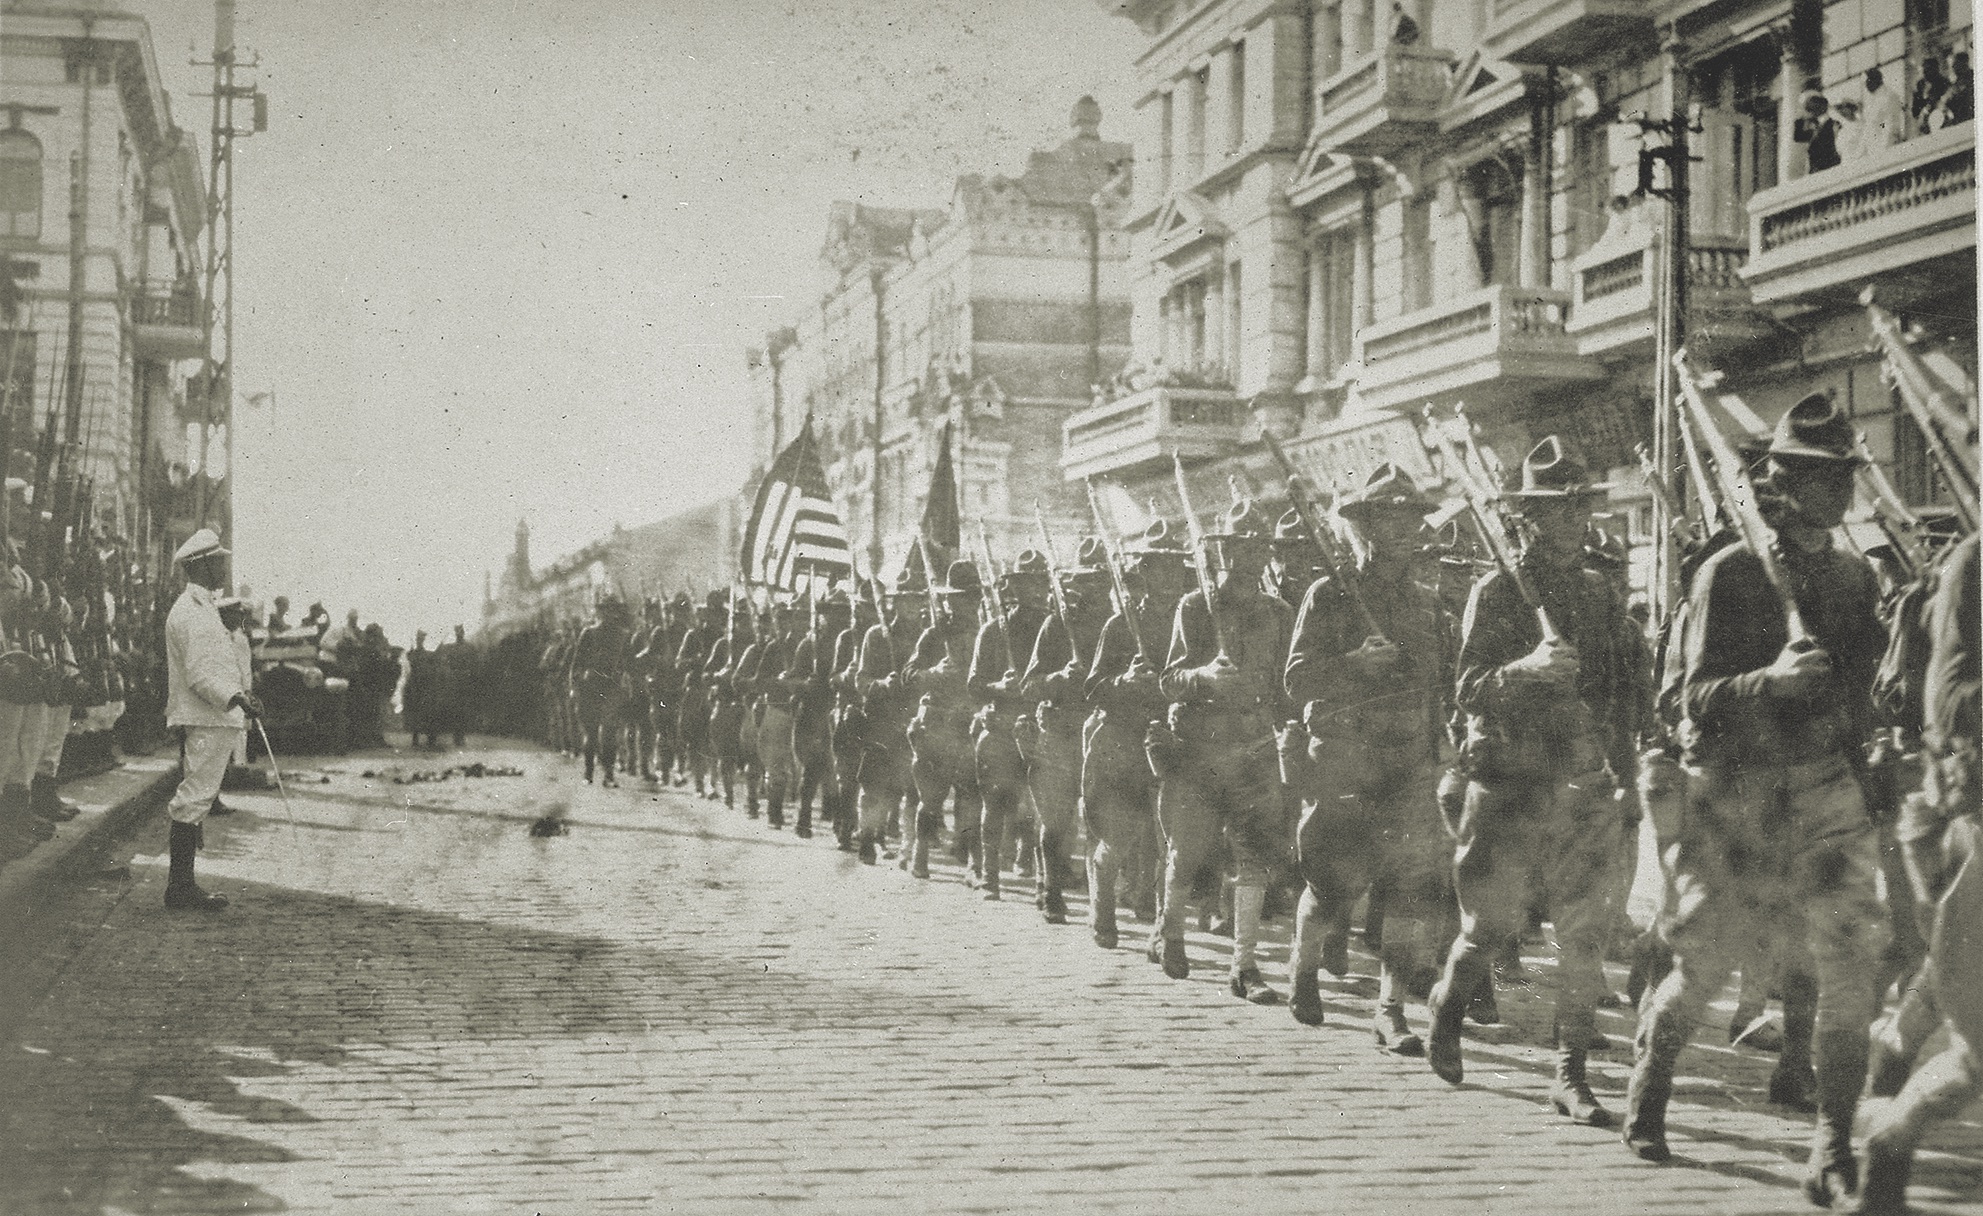 The Yanks parade through the streets of Vladivostok. (National Archives)